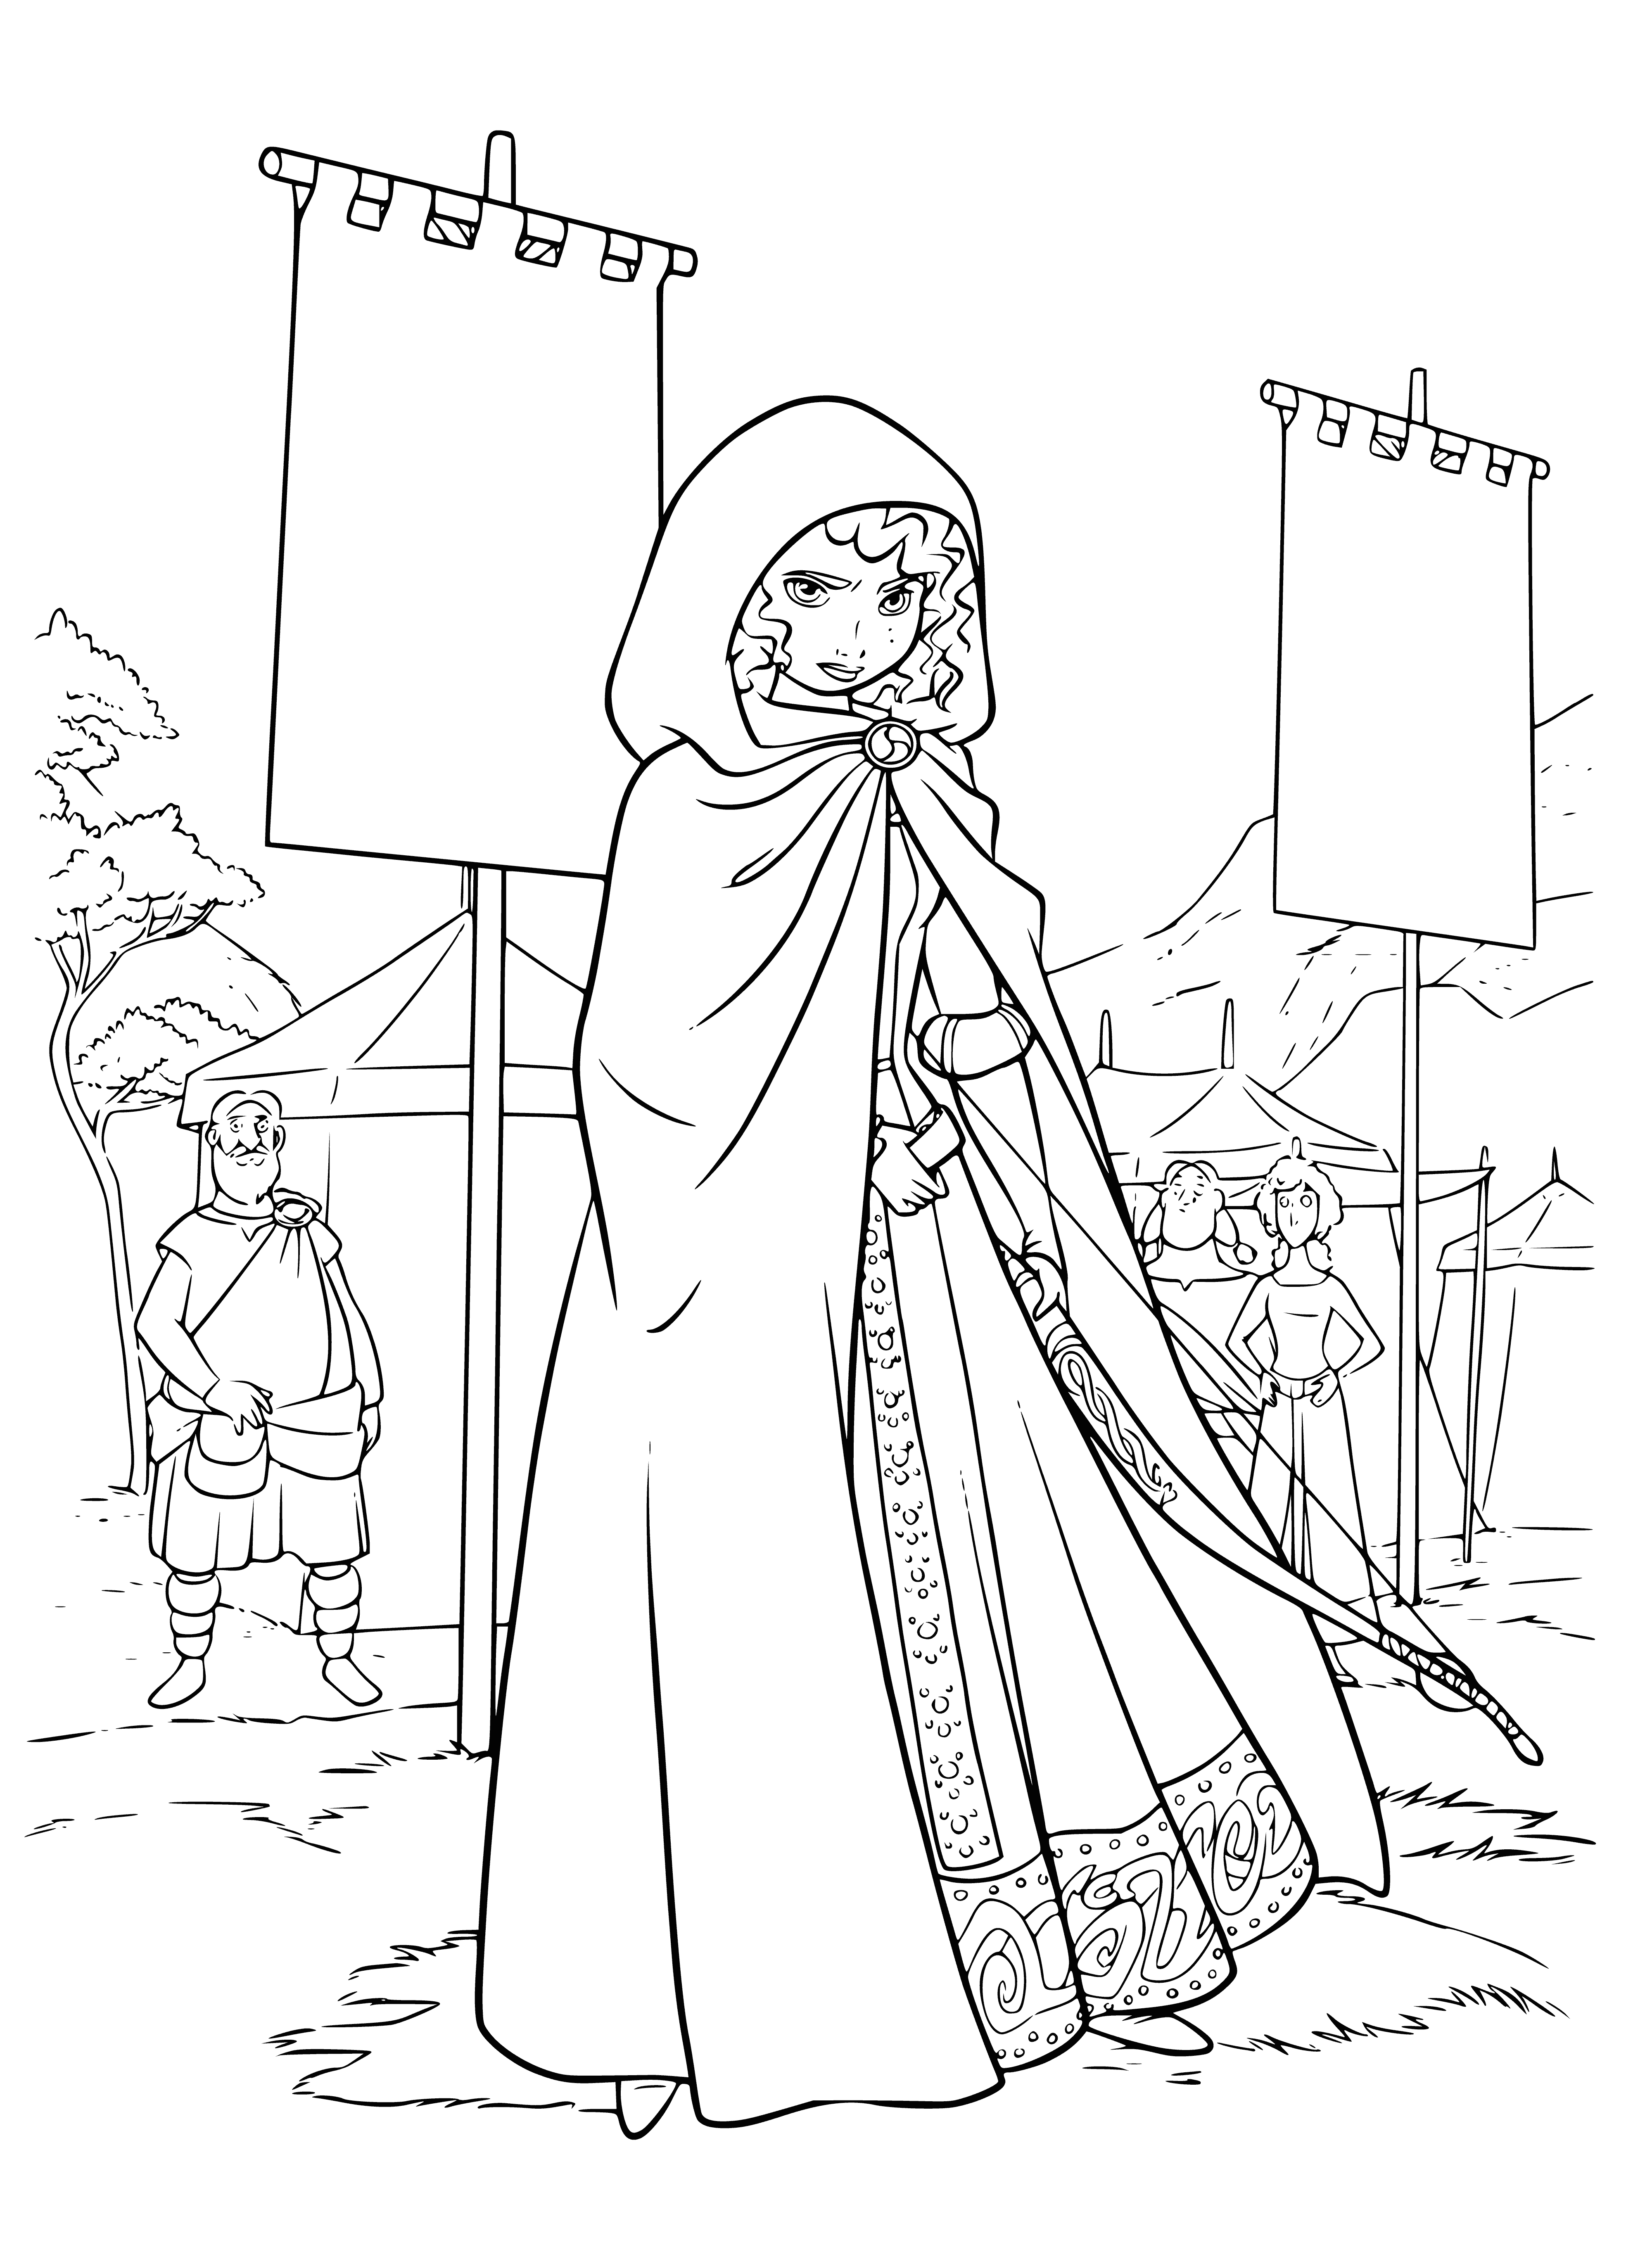 coloring page: Girl in green dress w/ blue sash stands in front of crowd, holding bow and arrow.